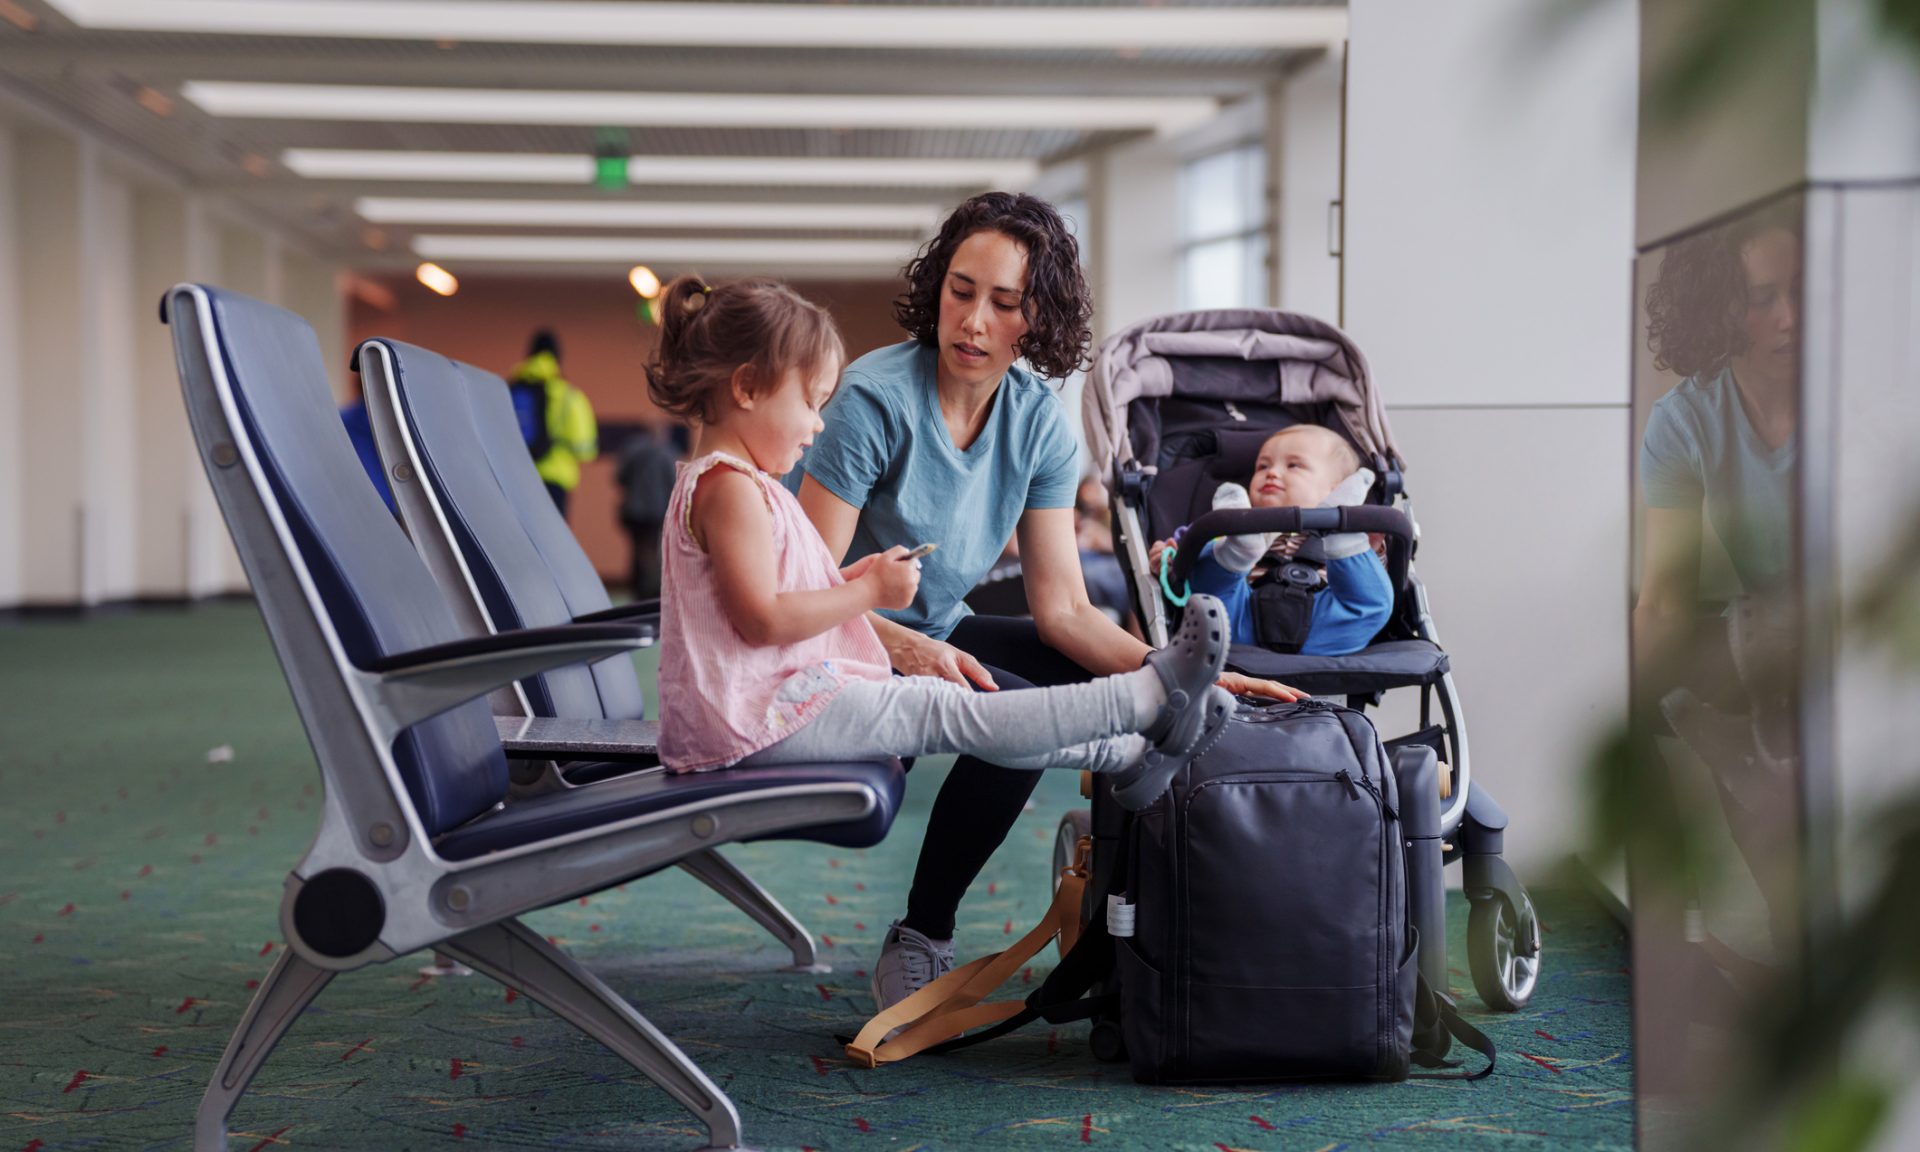 TSA Carry-On Restrictions You Need to Know - NerdWallet